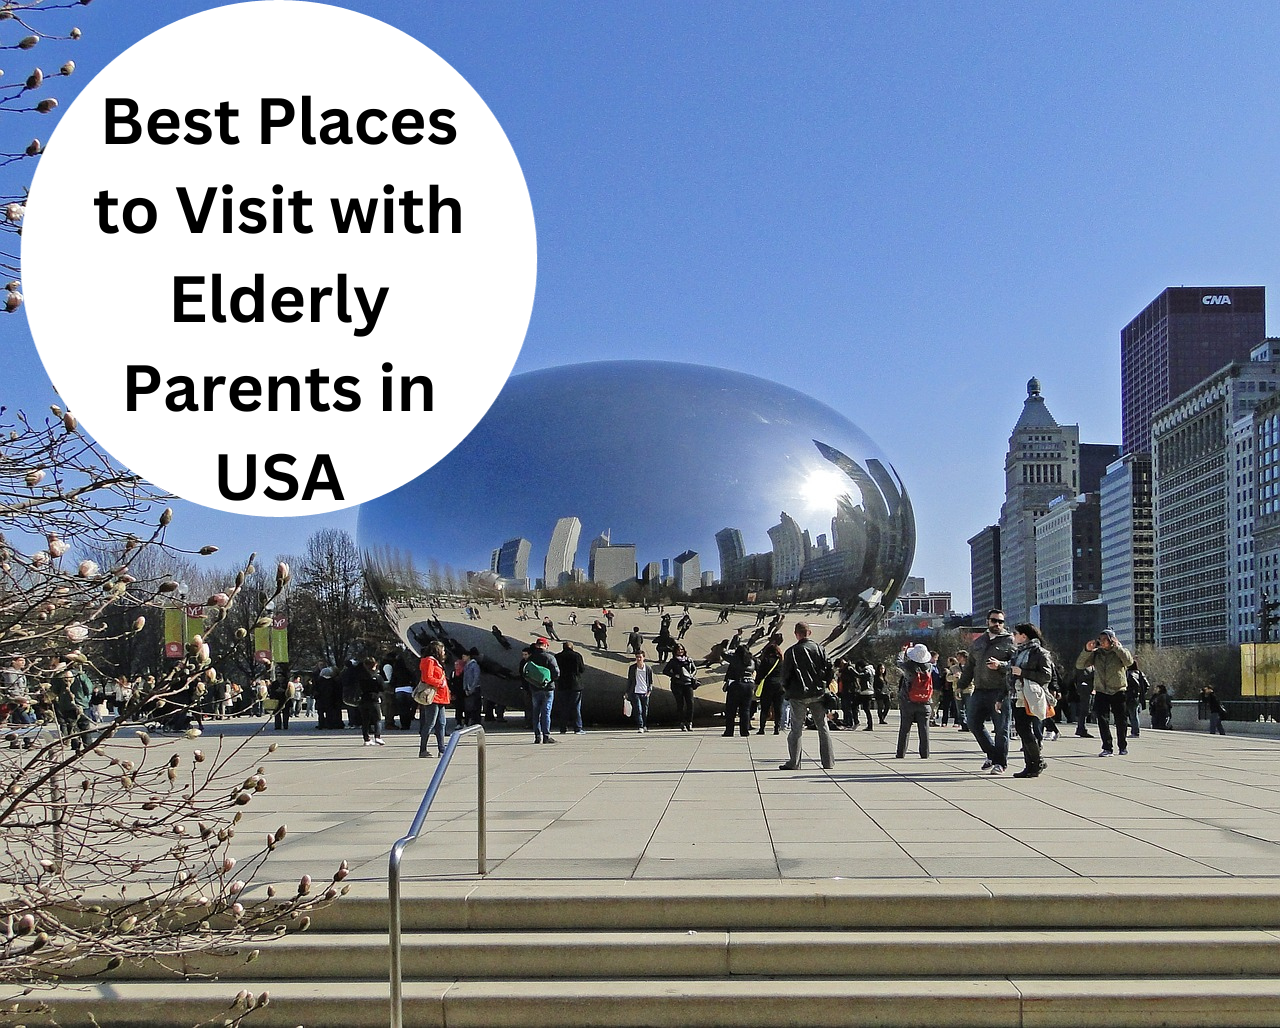 Best Places to Visit with Elderly Parents in USA